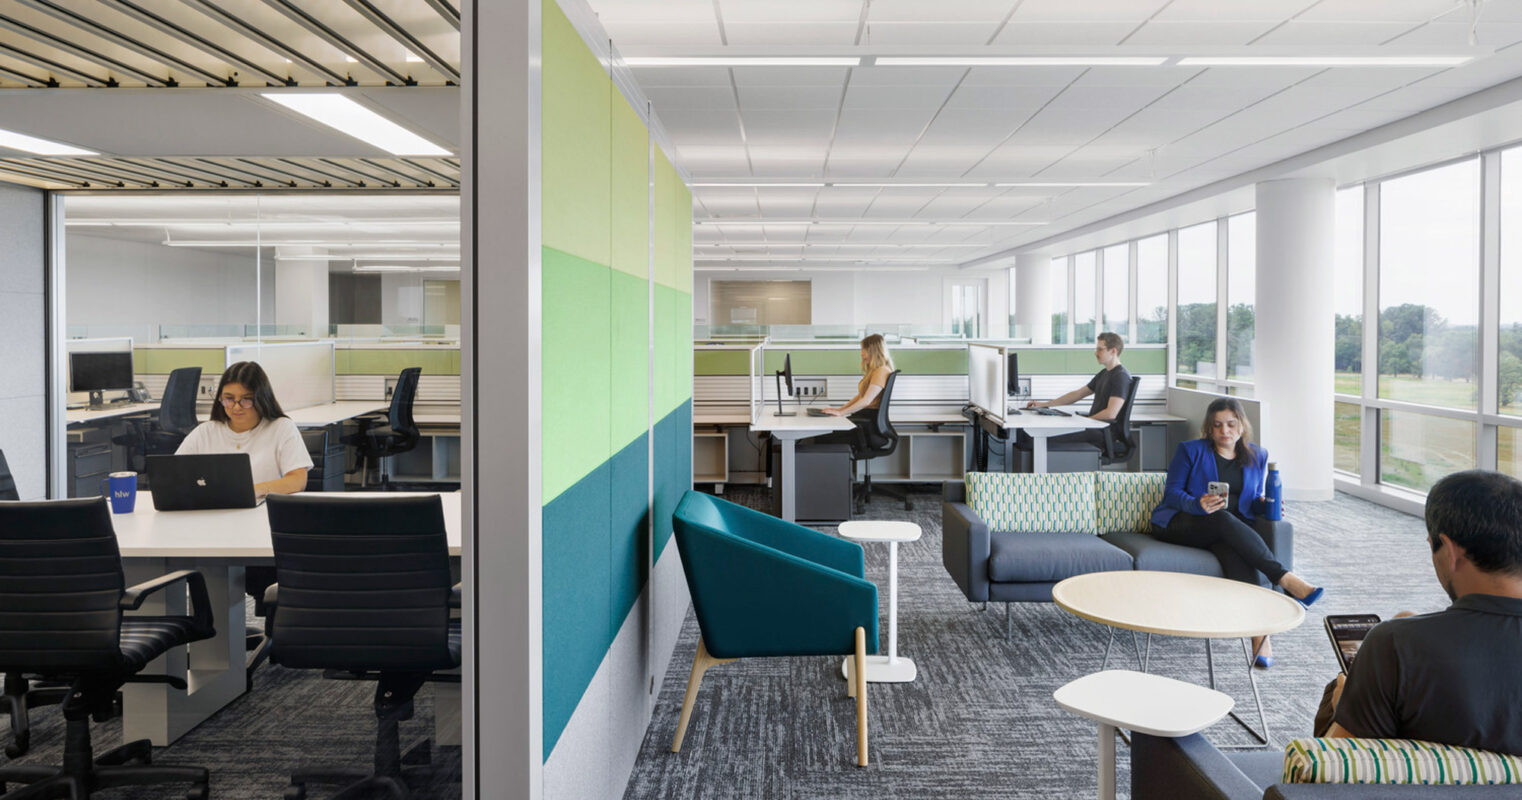 Open-plan office space featuring modular workstations with ergonomic chairs, individual privacy panels, and ambient natural lighting from floor-to-ceiling windows. A casual seating area introduces vibrant upholstery, complementing the space's contemporary, collaborative atmosphere.